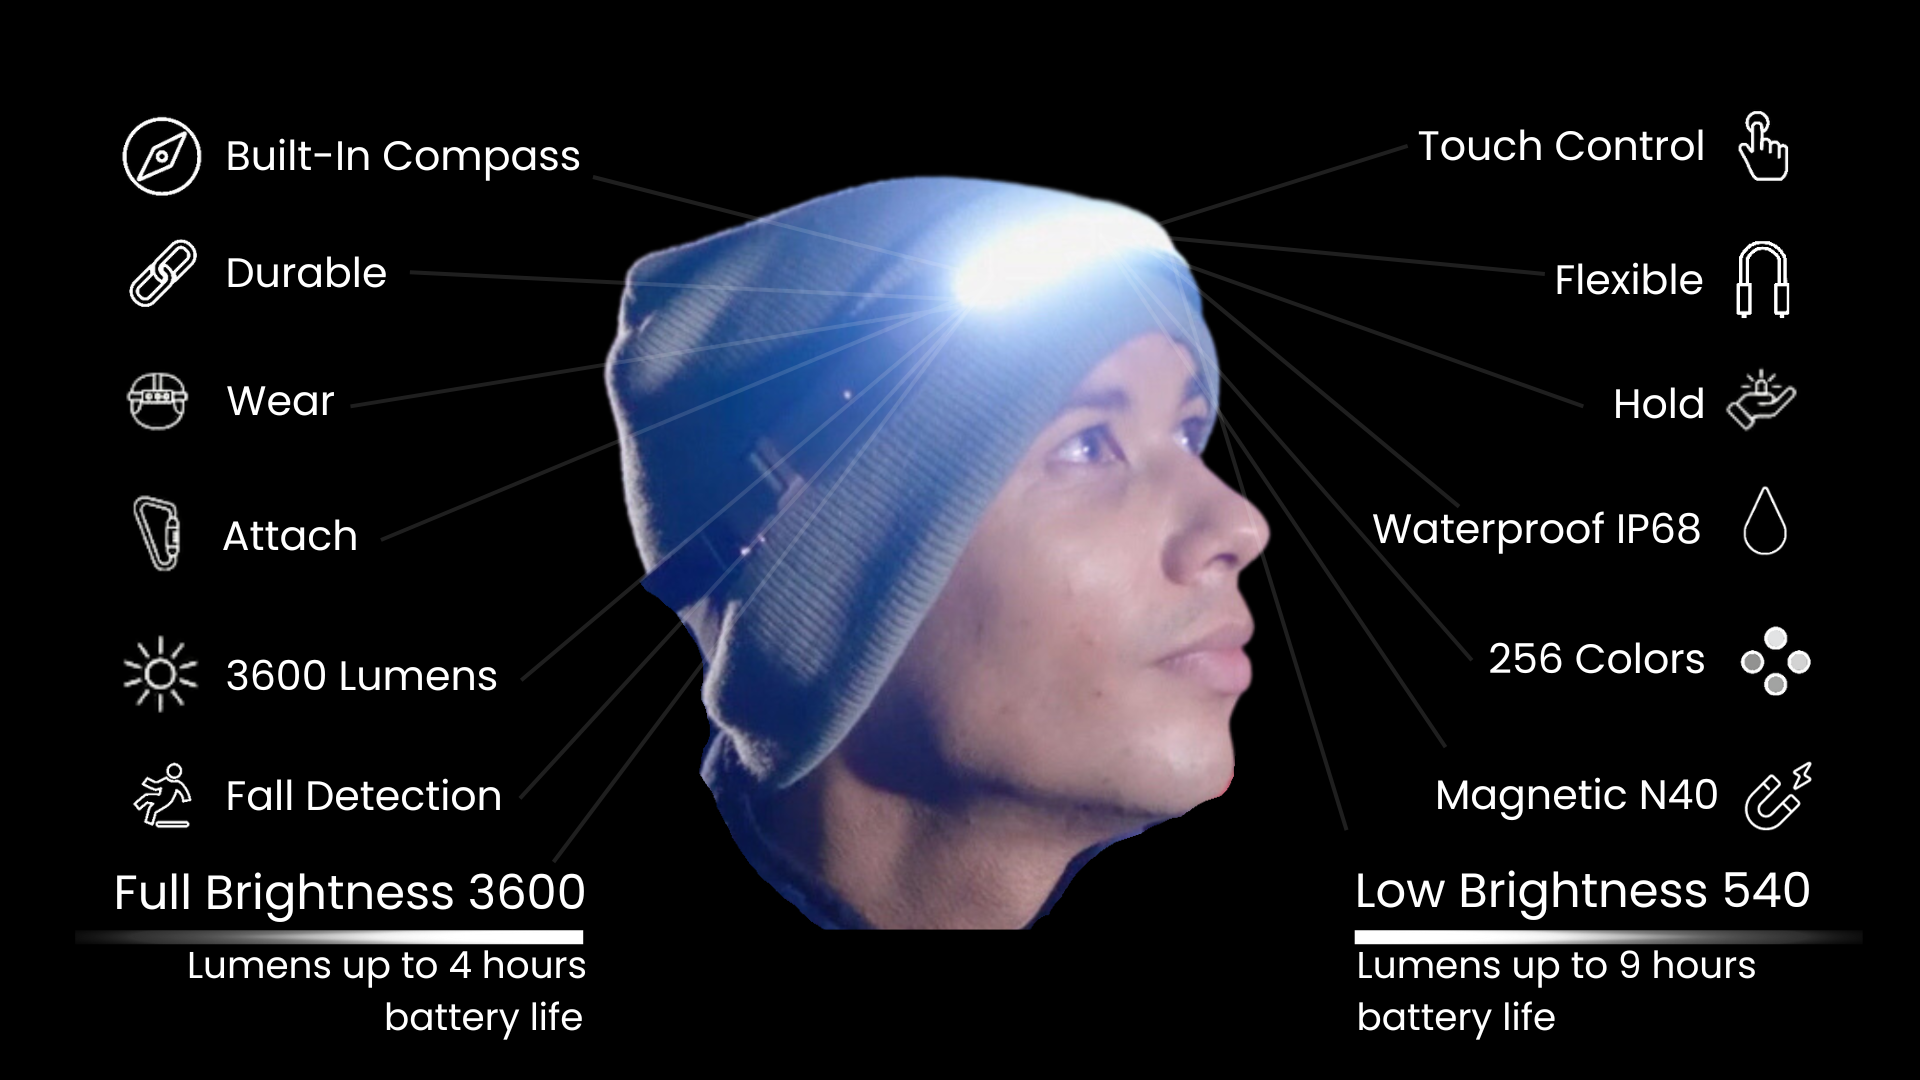 Person wearing JordiLight headlamp, demonstrating the powerful 3600 lumens maximum brightness with a runtime of 4 hours, and a low brightness setting of 540 lumens lasting 9 hours. Features text outlines additional functionalities and benefits of JordiLight.